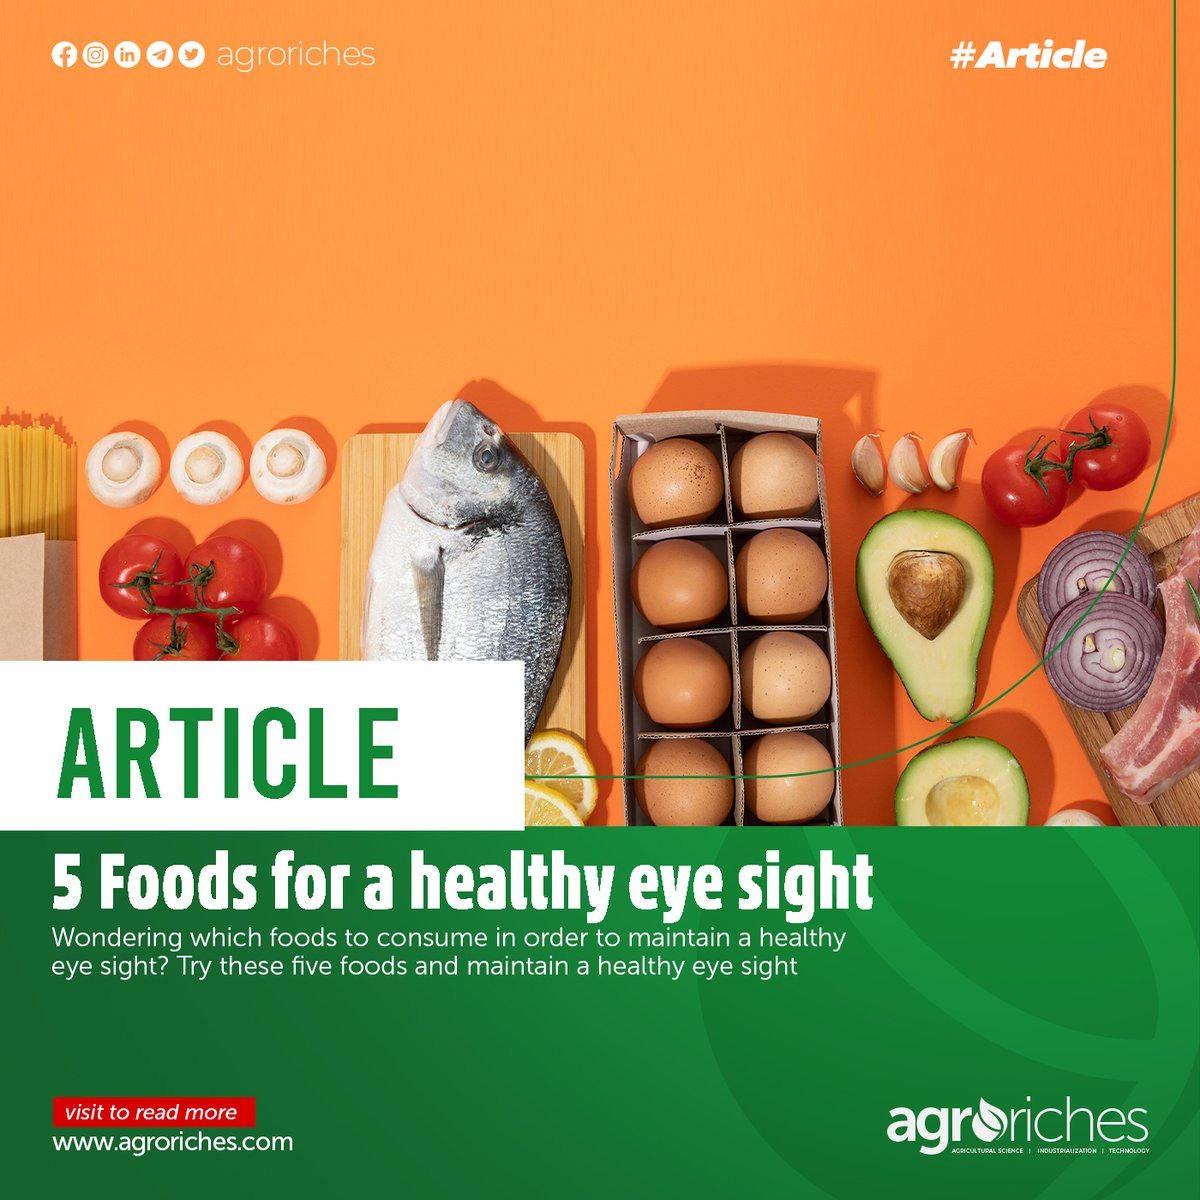 Foods to eat for a healthy eye sight.
Visit our website, agroriches.com, to read more.

#agroriches #agriculturaltrends #agriculturenews #african #women #agricultureinghana #ghana #articles #farming #growth #food #agriculture #technology